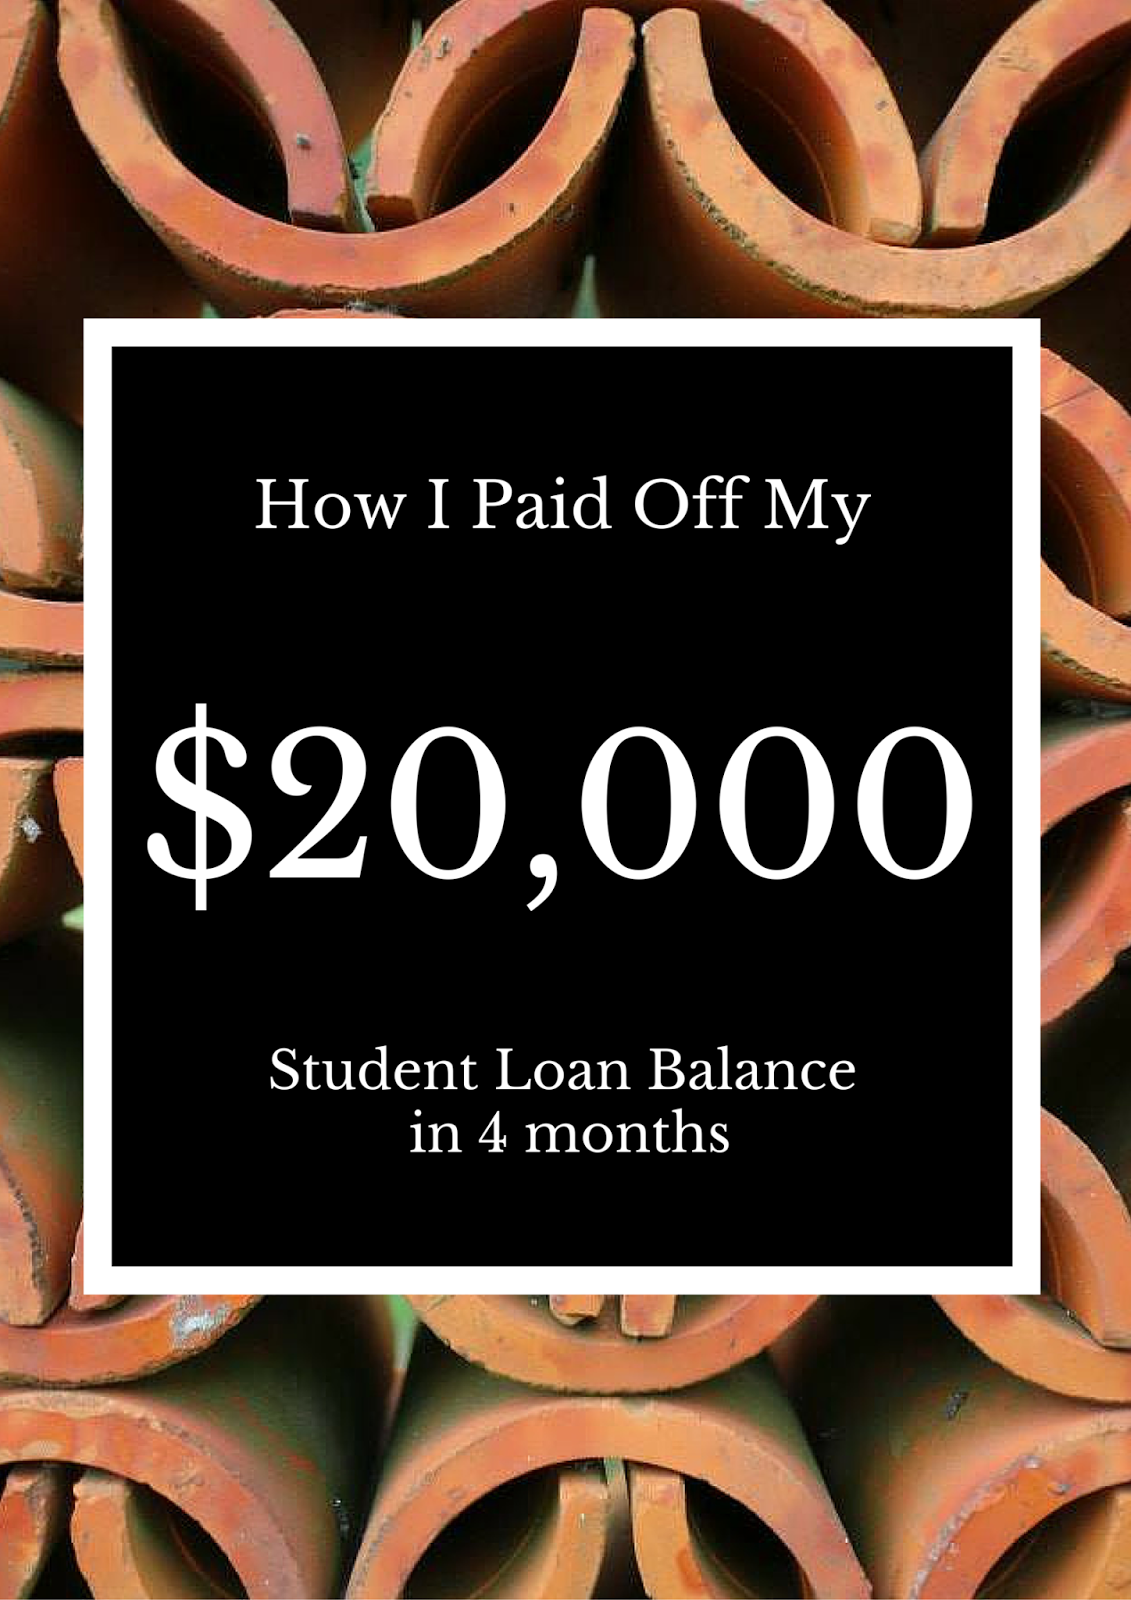 Can I Receive My Student Loan Early